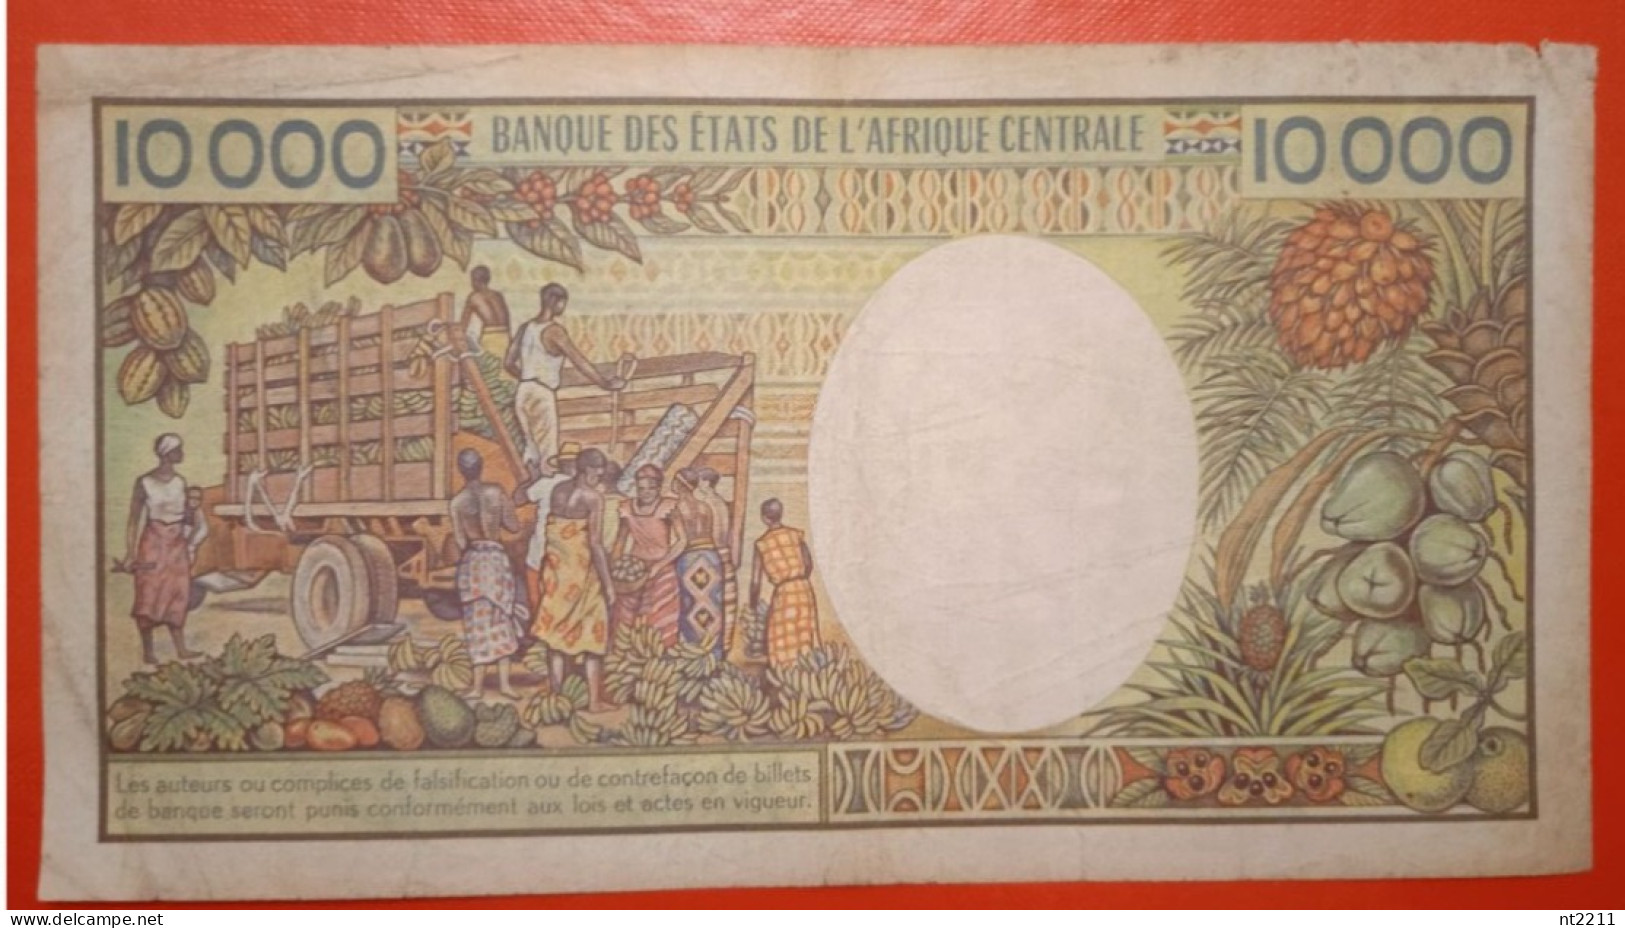 Banknote 10000 Francs Central African Republic - Centraal-Afrikaanse Republiek